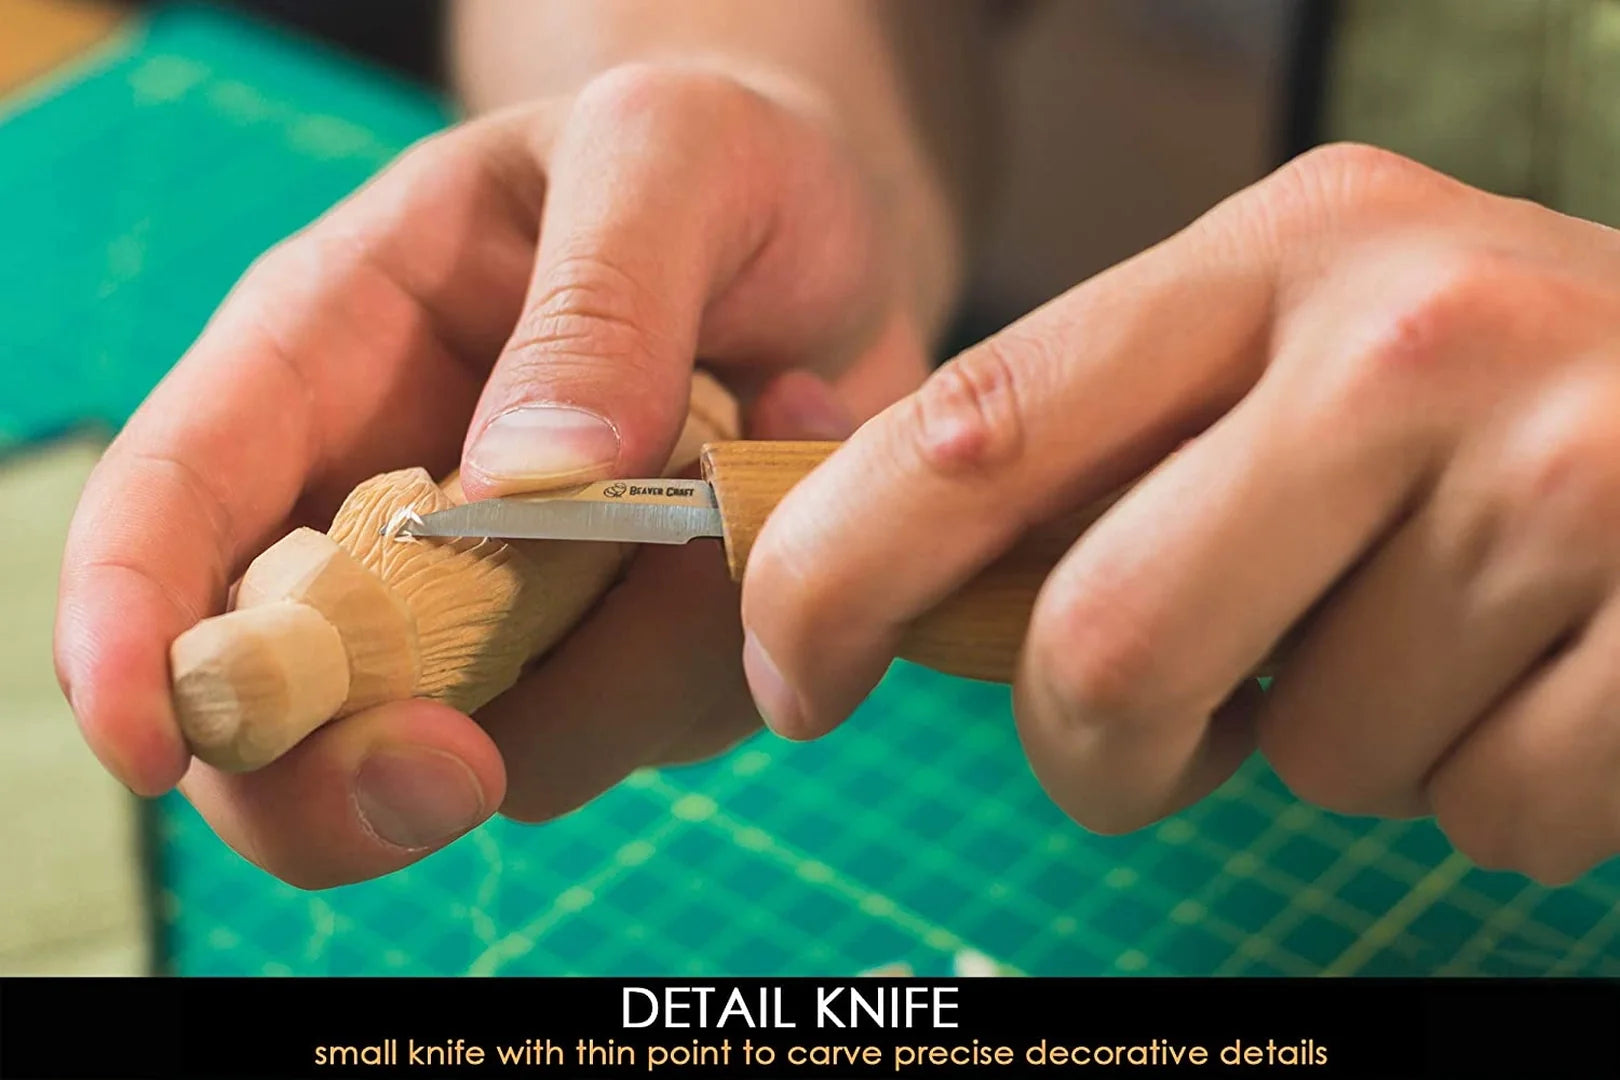 Craft Kits for Adults: Learn a New Hobby – BeaverCraft Tools